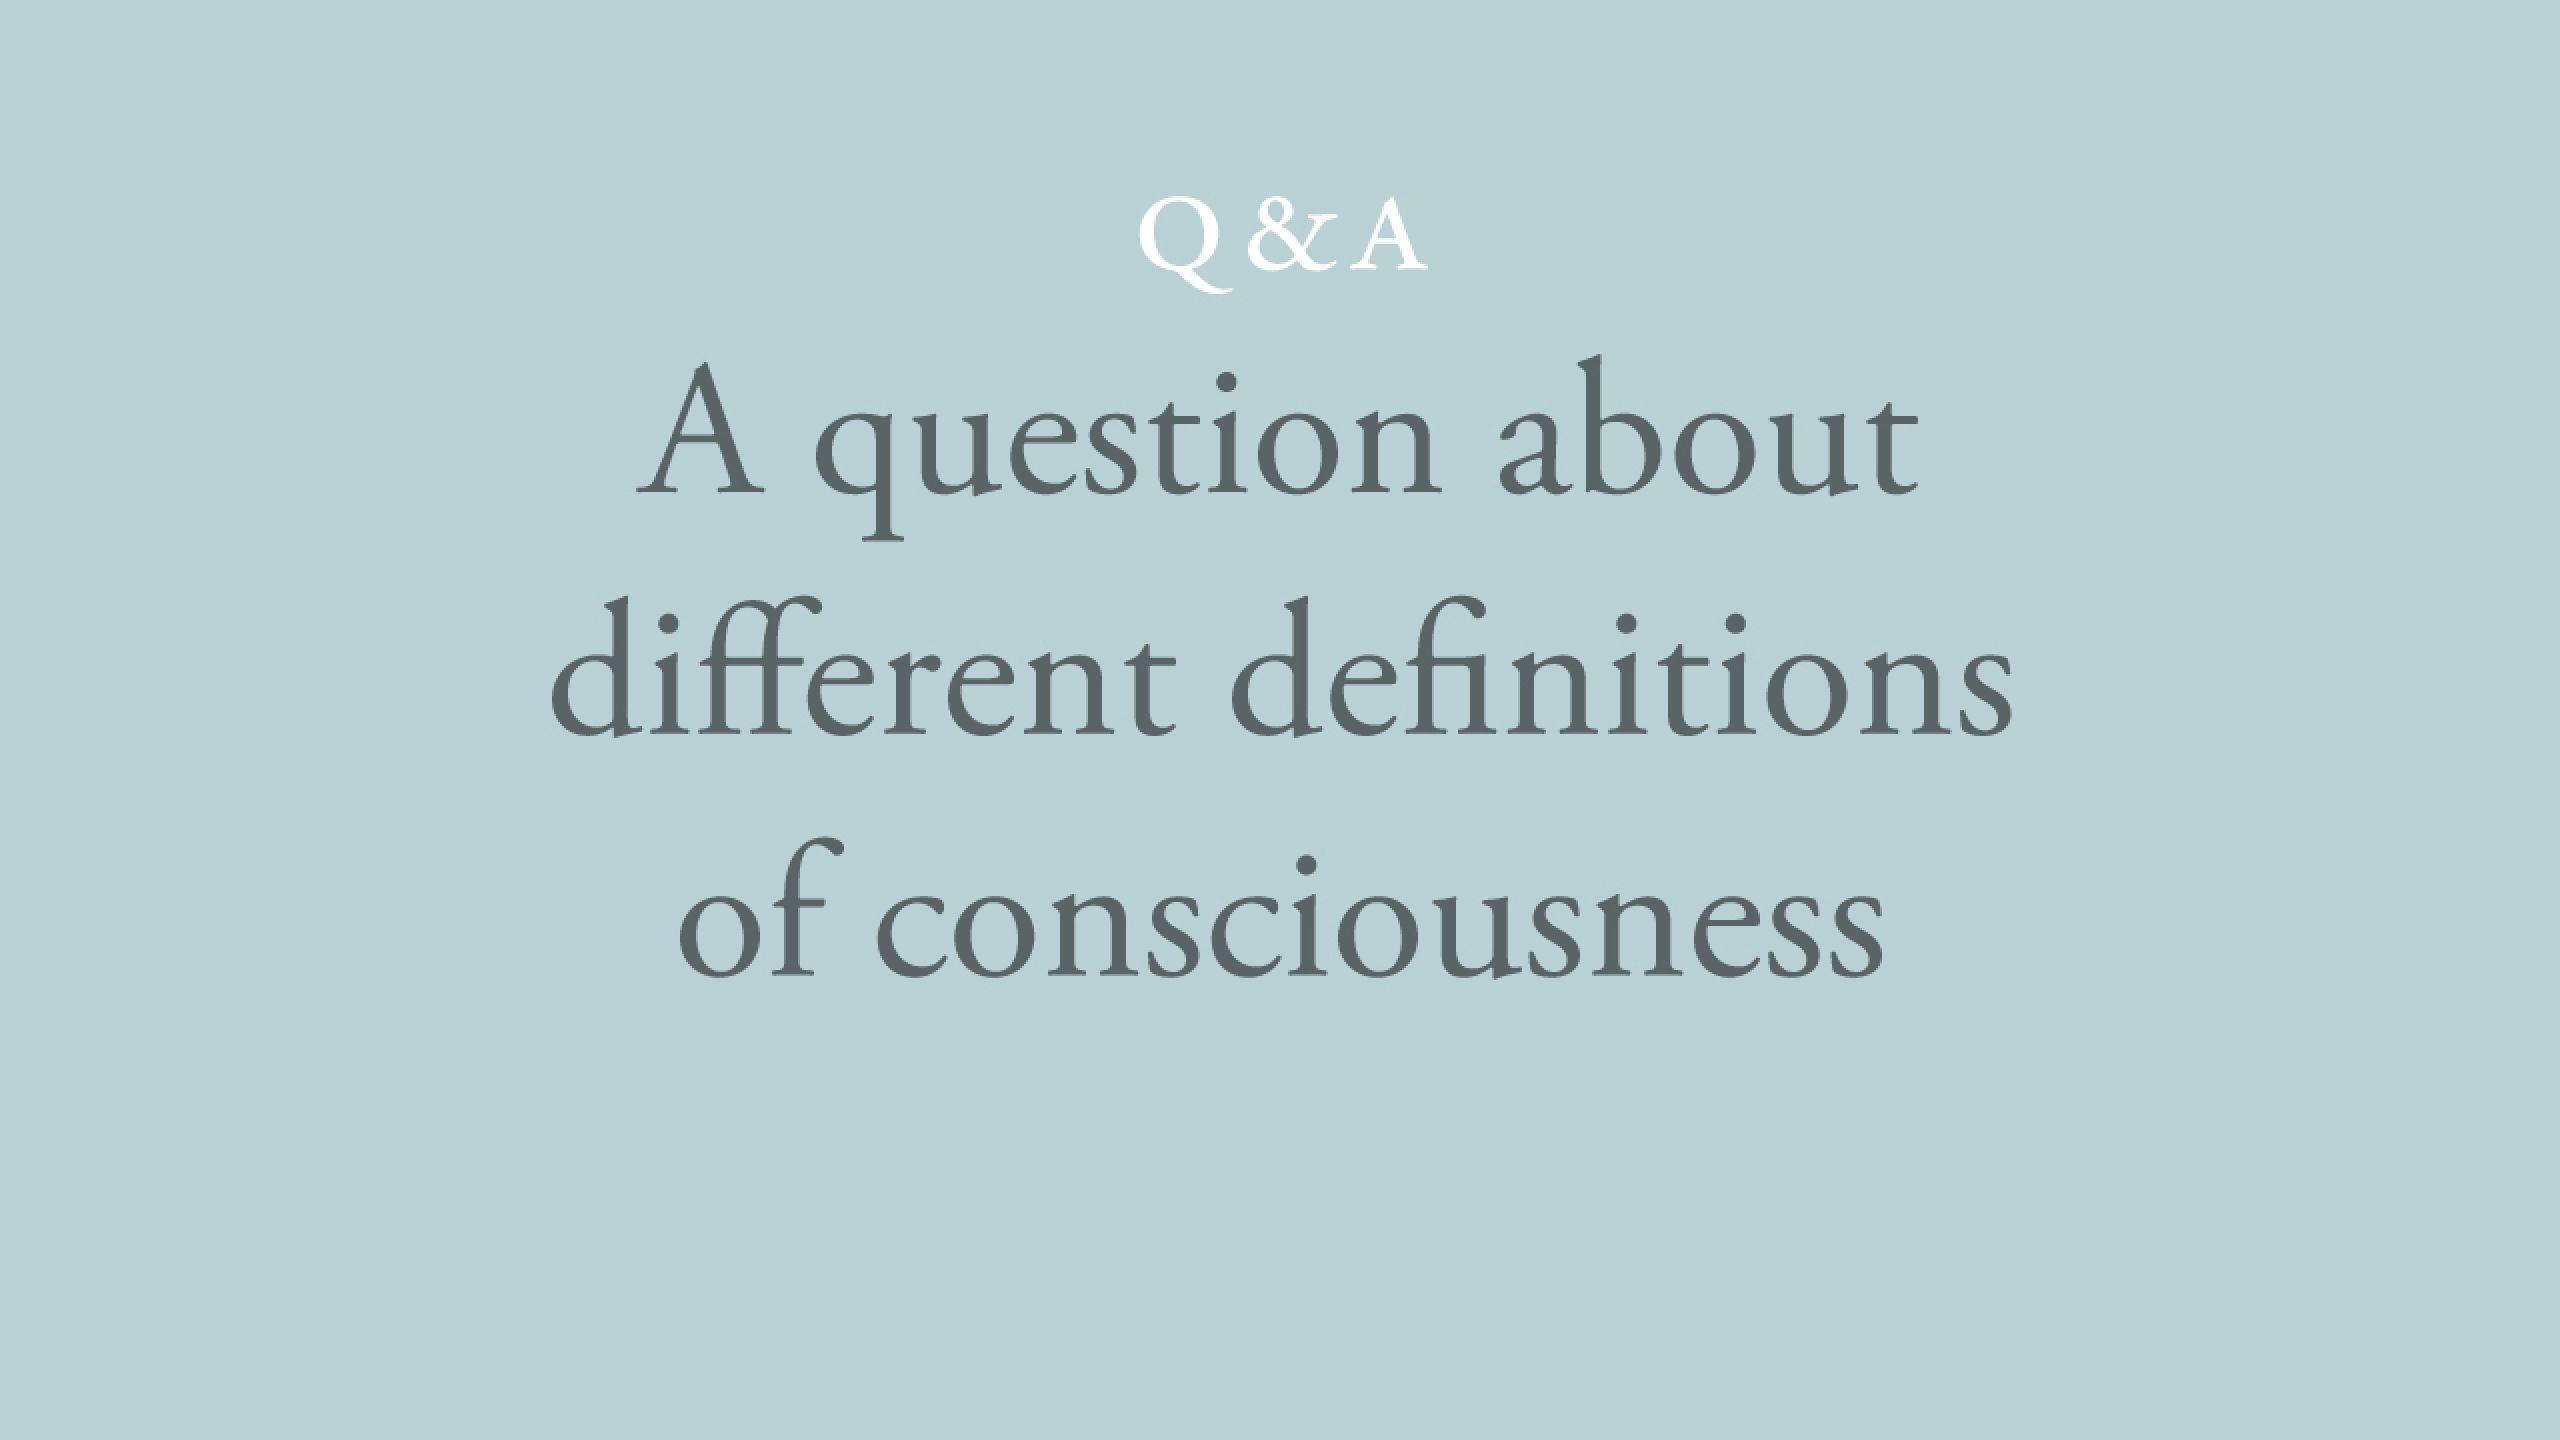 How does your explanation of consciousness differ from Nisargadatta's?